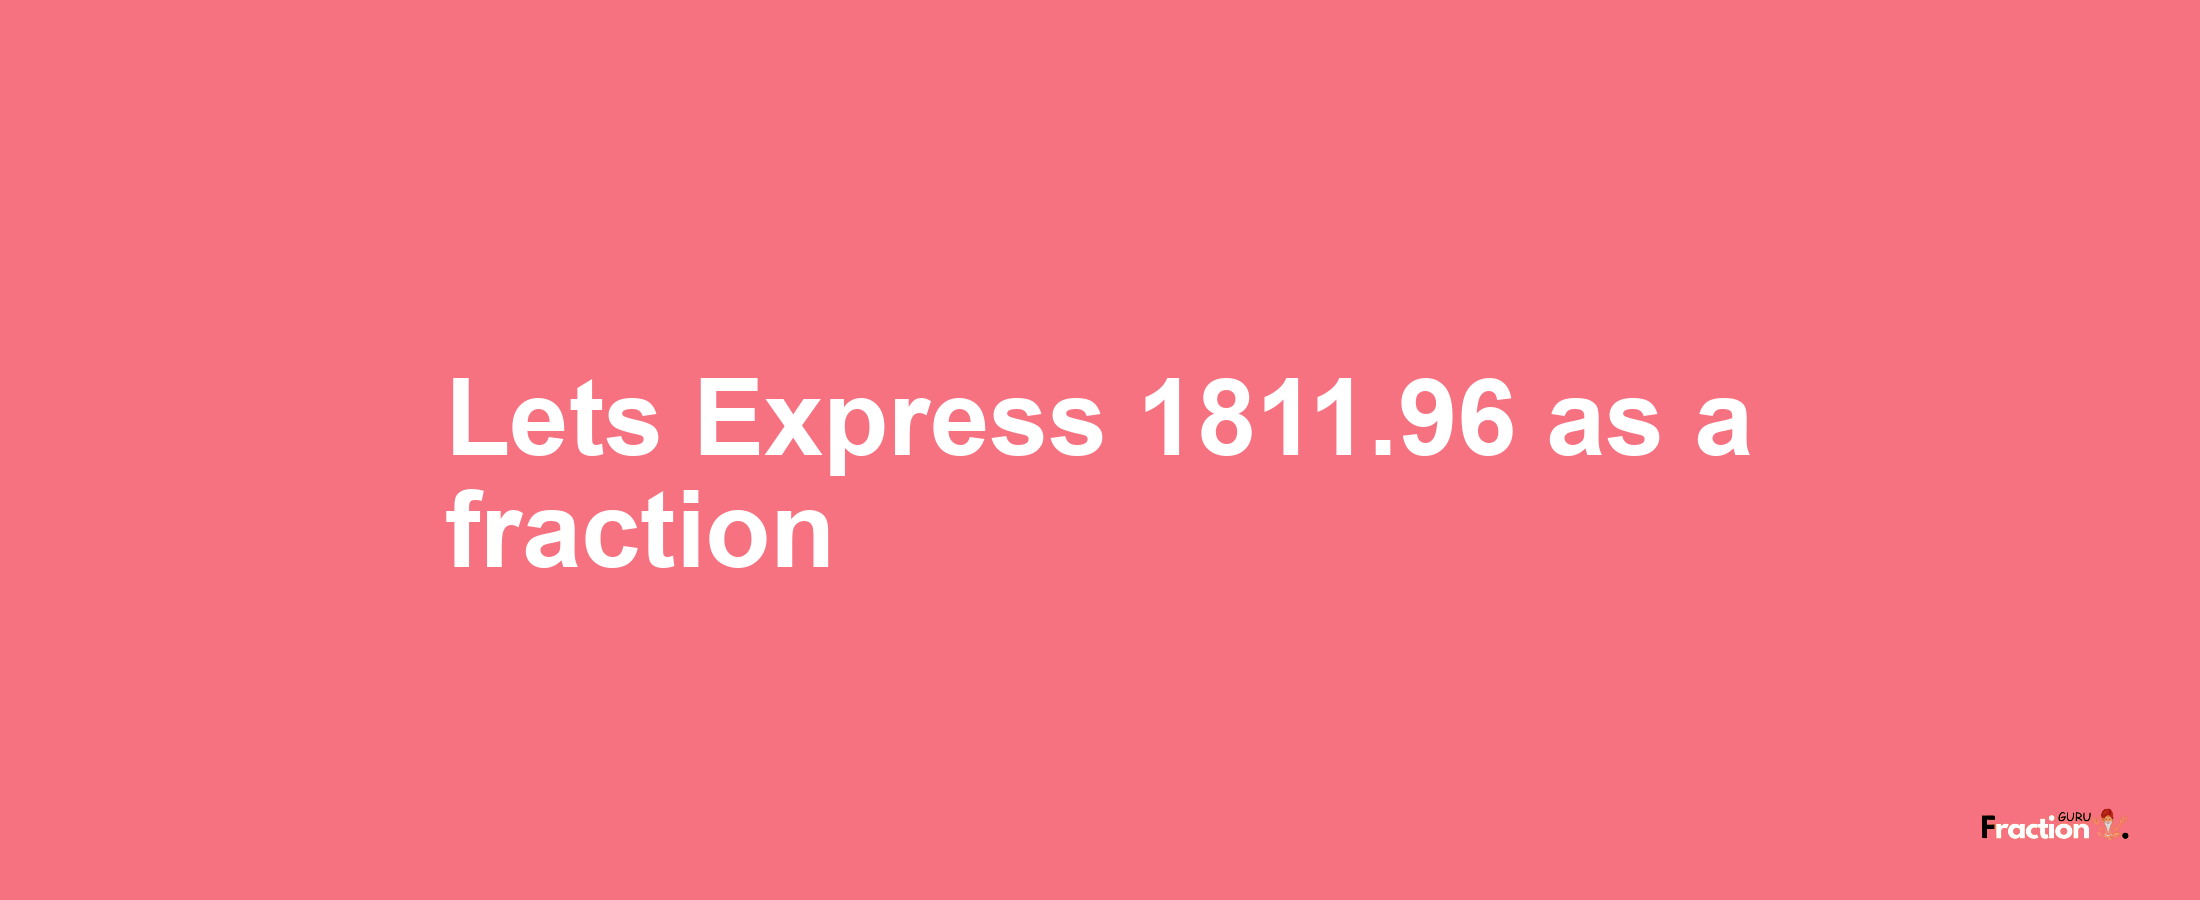 Lets Express 1811.96 as afraction